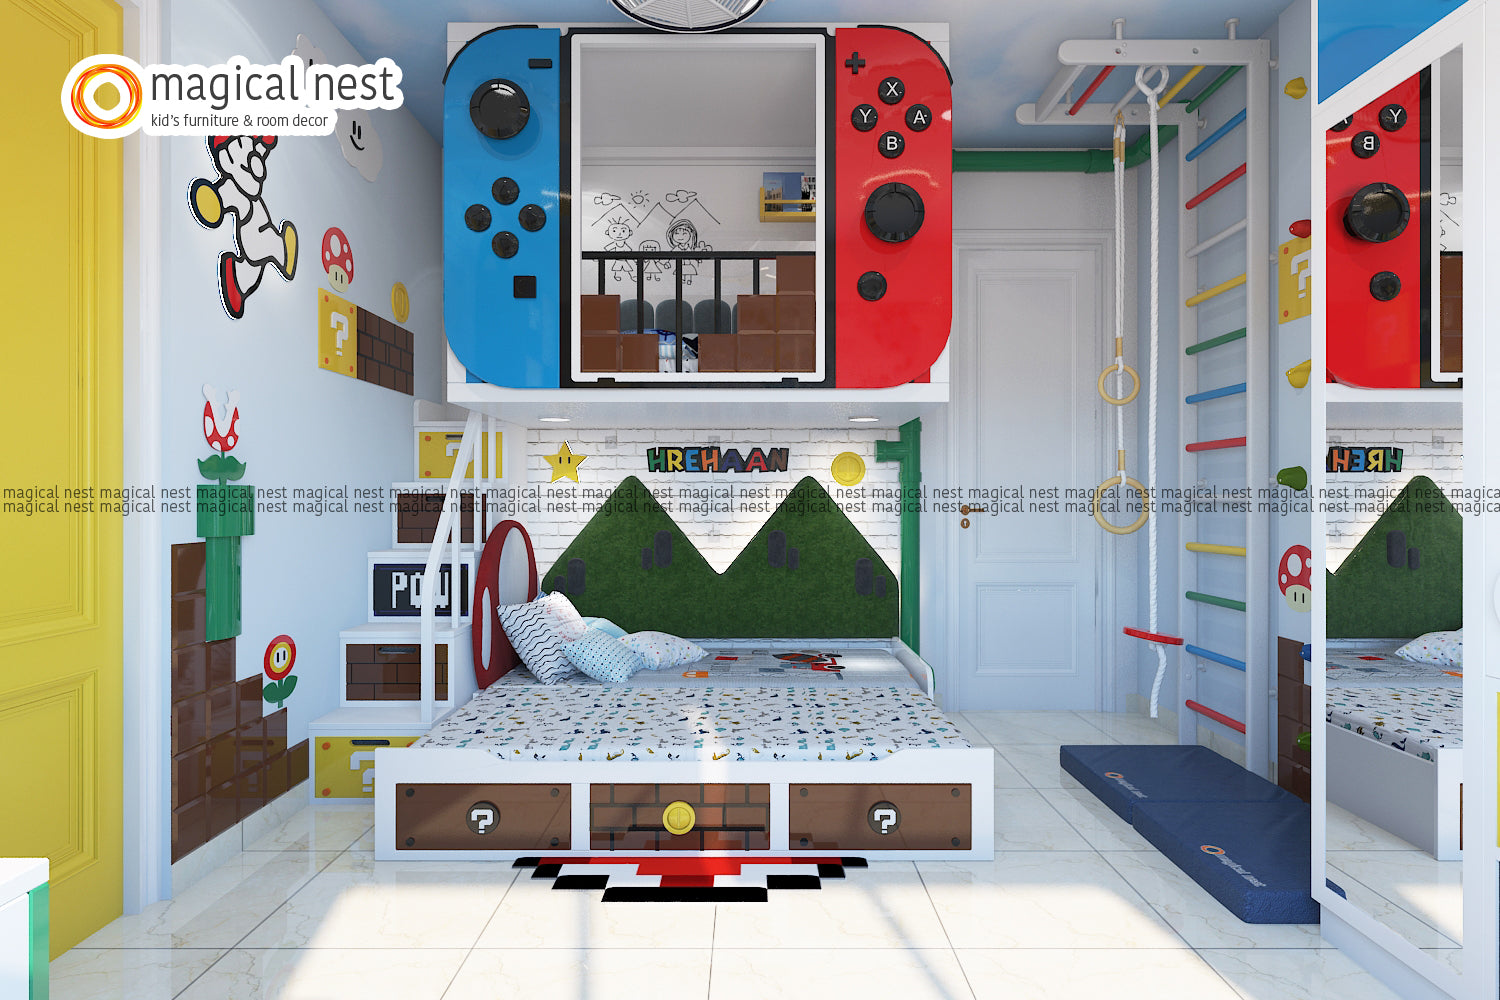 The kid’s room for boys is designed based on the Mario theme. The wall art, headboard and the loft area design justify the theme. There is an activity area and galaxy star ceiling.